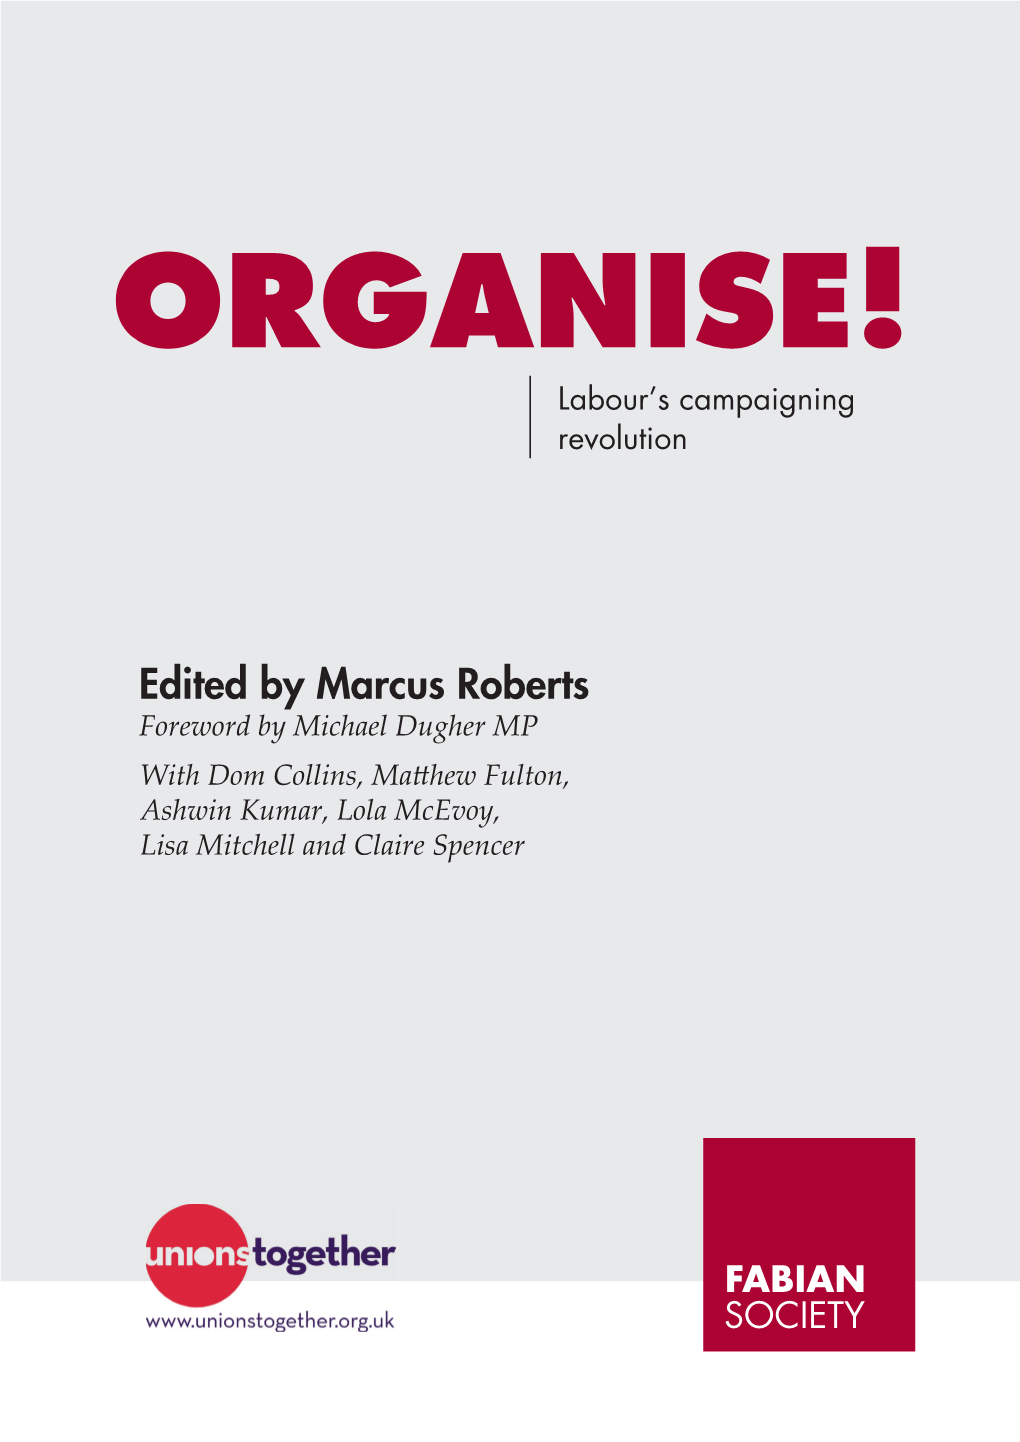 Edited by Marcus Roberts Foreword by Michael Dugher MP with Dom Collins, Matt Hew Fulton, Ashwin Kumar, Lola Mcevoy, Lisa Mitchell and Claire Spencer P Post